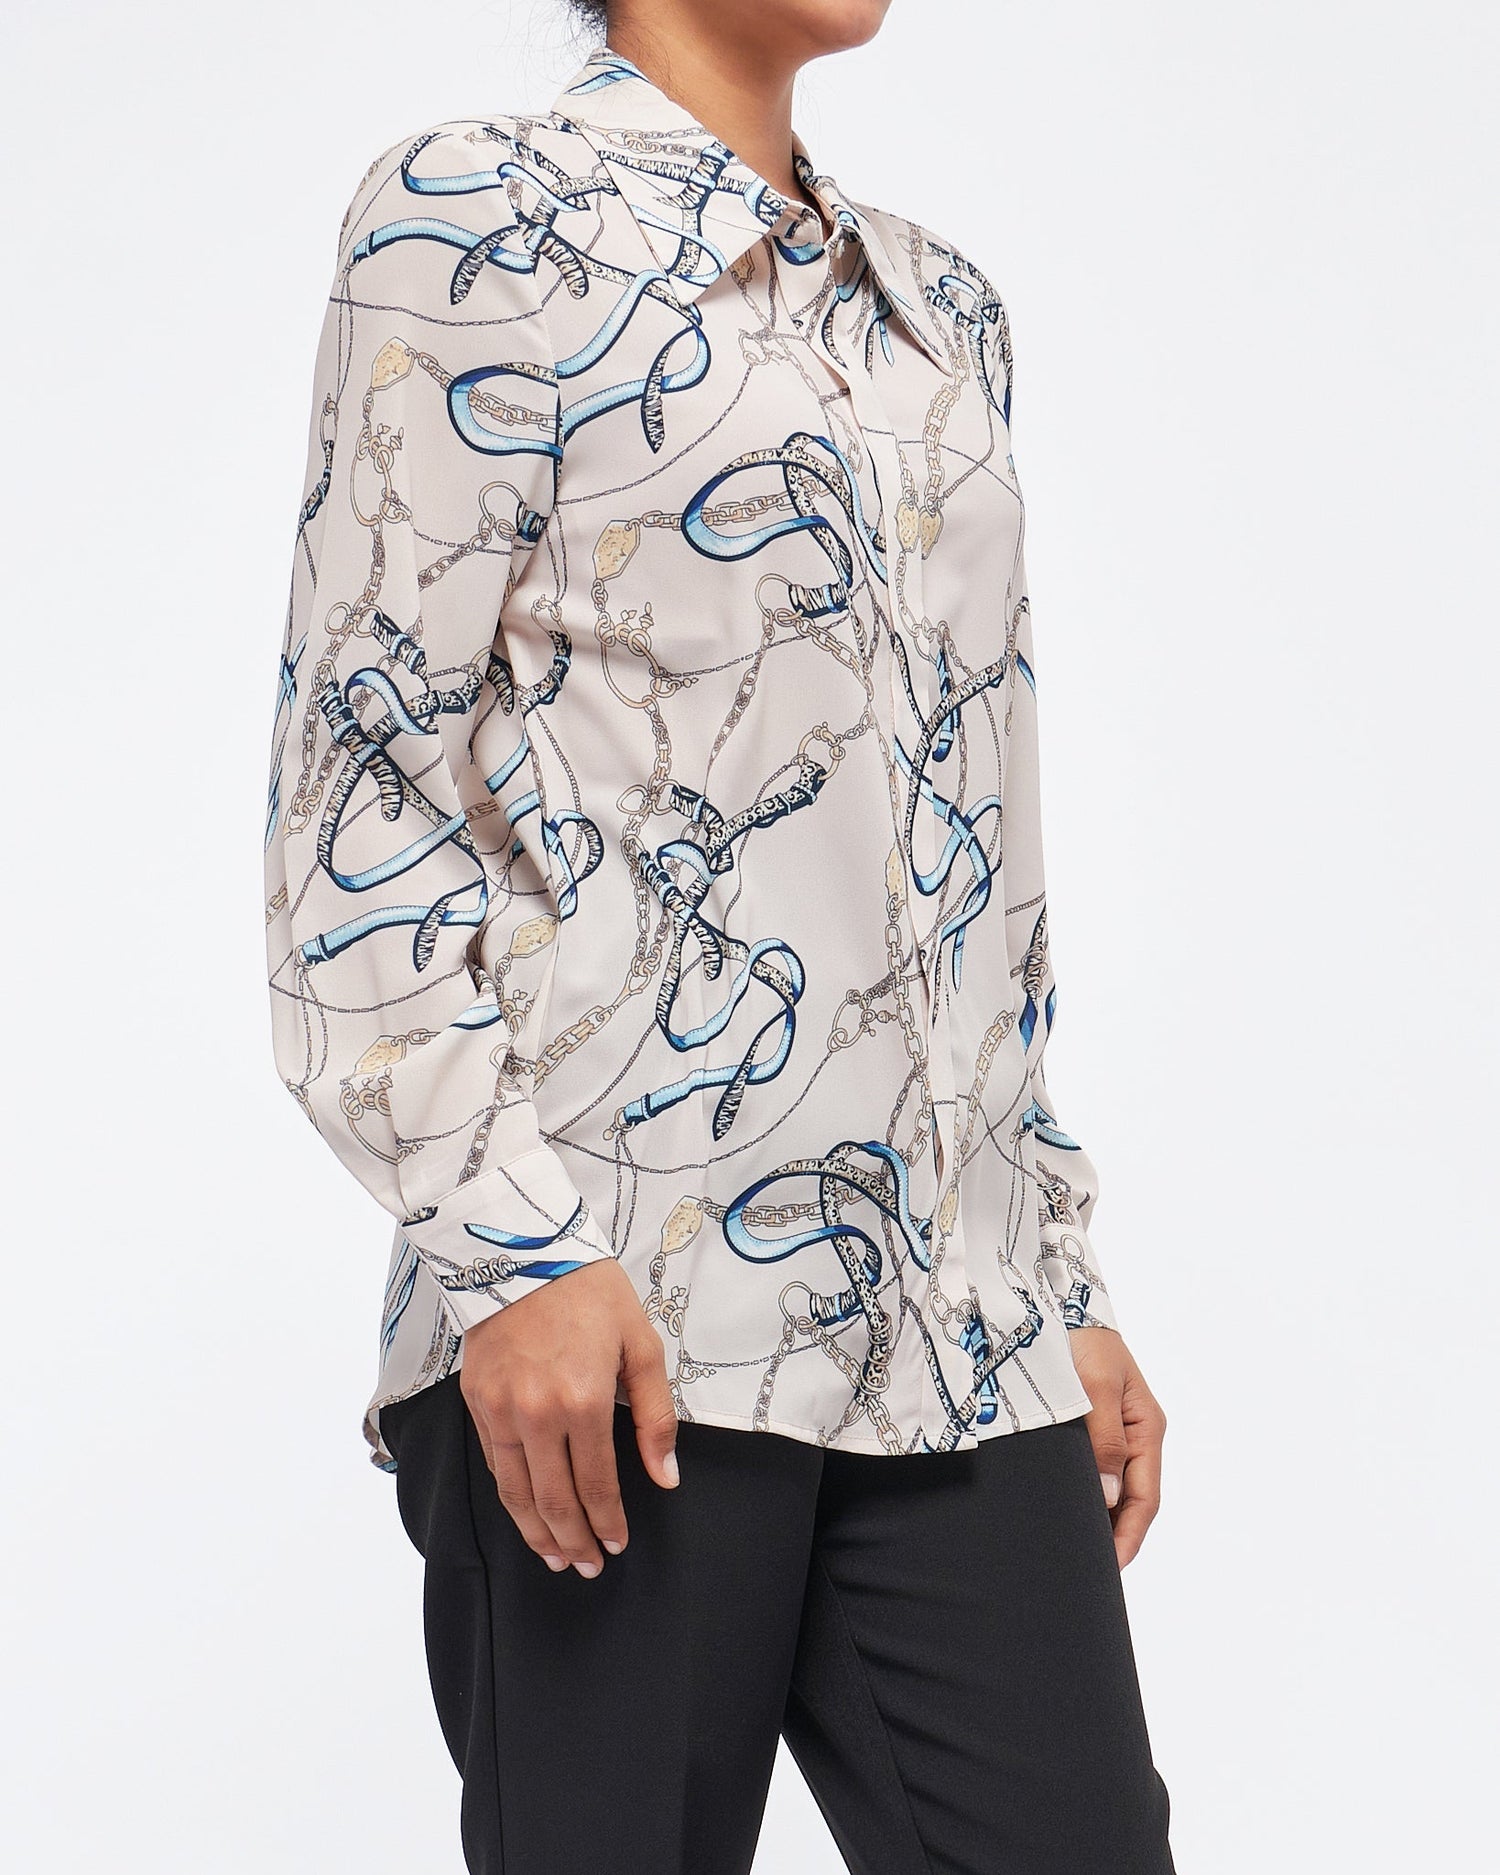 MOI OUTFIT-Chain Over Printed Lady Blouse 17.90